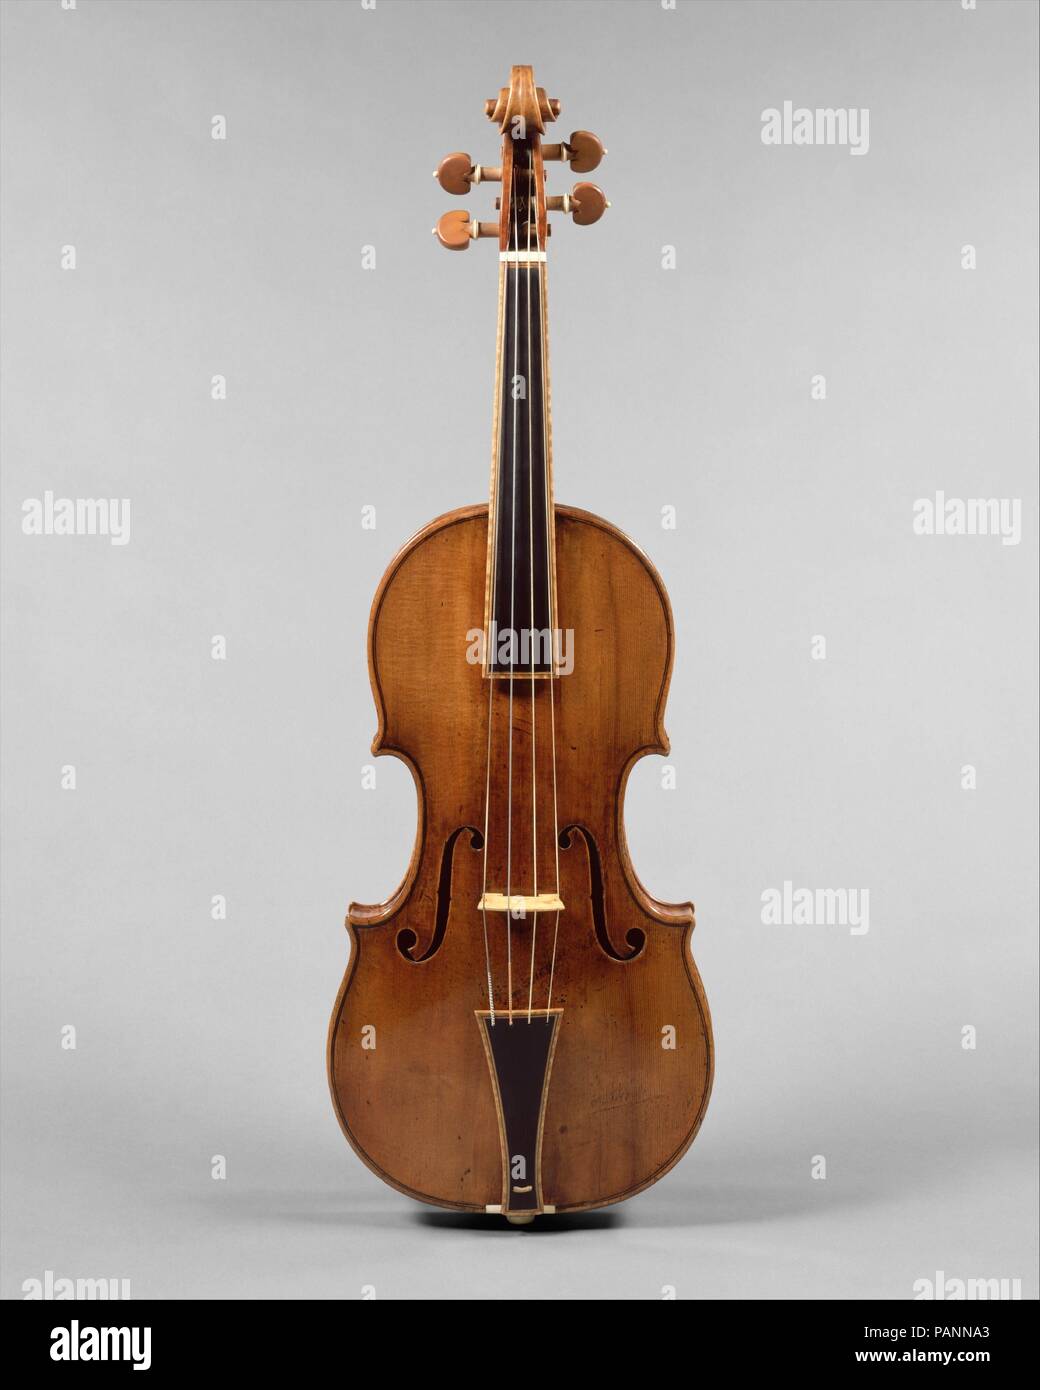 'The Gould' Violin. Culture: Italian (Cremona). Dimensions: Height: 23 1/4 in. (59 cm)  Width: 7 3/4 in. (19.7 cm). Maker: Antonio Stradivari (Italian, Cremona 1644-1737 Cremona). Date: 1693.  'The Gould' violin has a two-piece maple back with a tight flame and a two-piece spruce top with an orange-brown varnish. Although modern performers continue to use seventeenth- and eighteenth-century stringed instruments by great makers, nearly all of the instruments have been modified in order to remain useful as performance spaces grew larger and repertoire pushed instruments to create louder sound ov Stock Photo